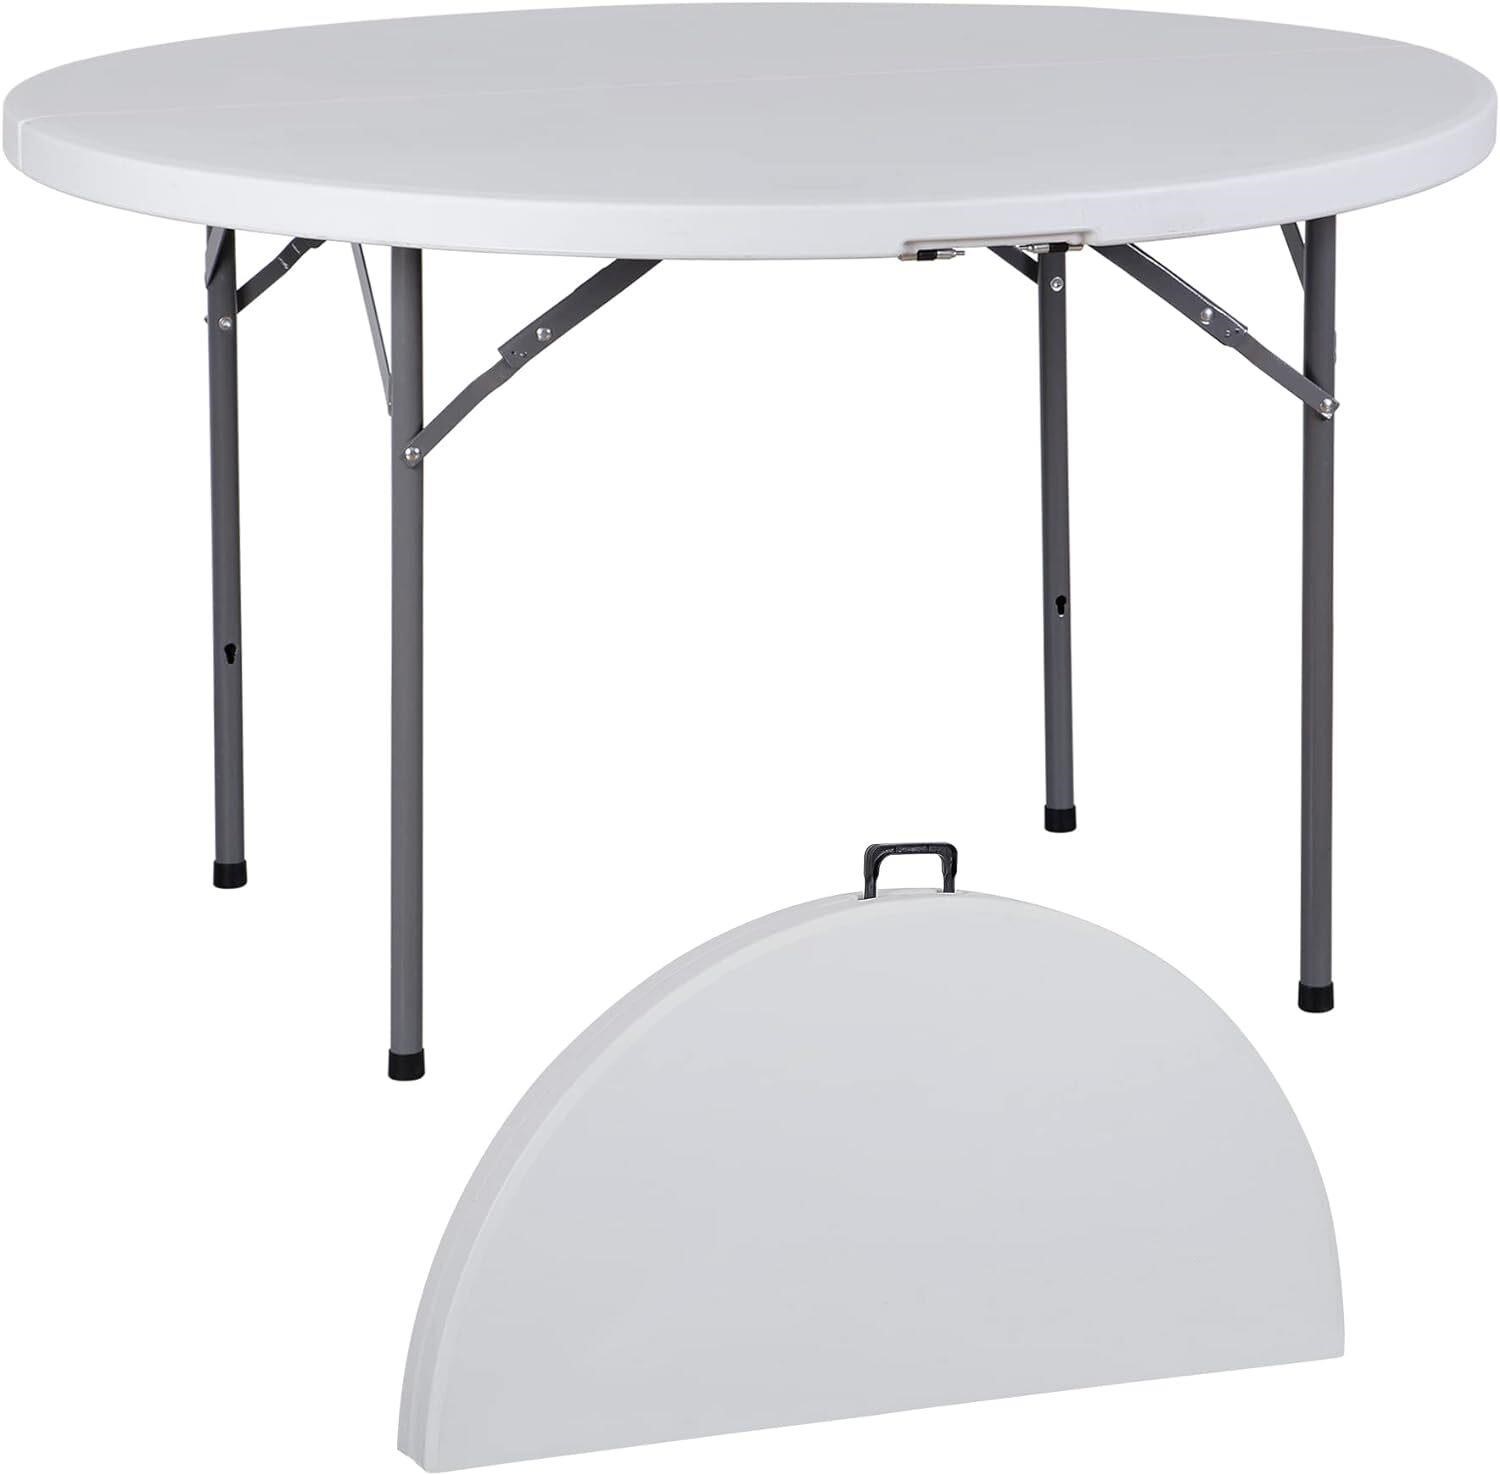 SUPER DEAL 4 Foot Round Folding Card Table  48